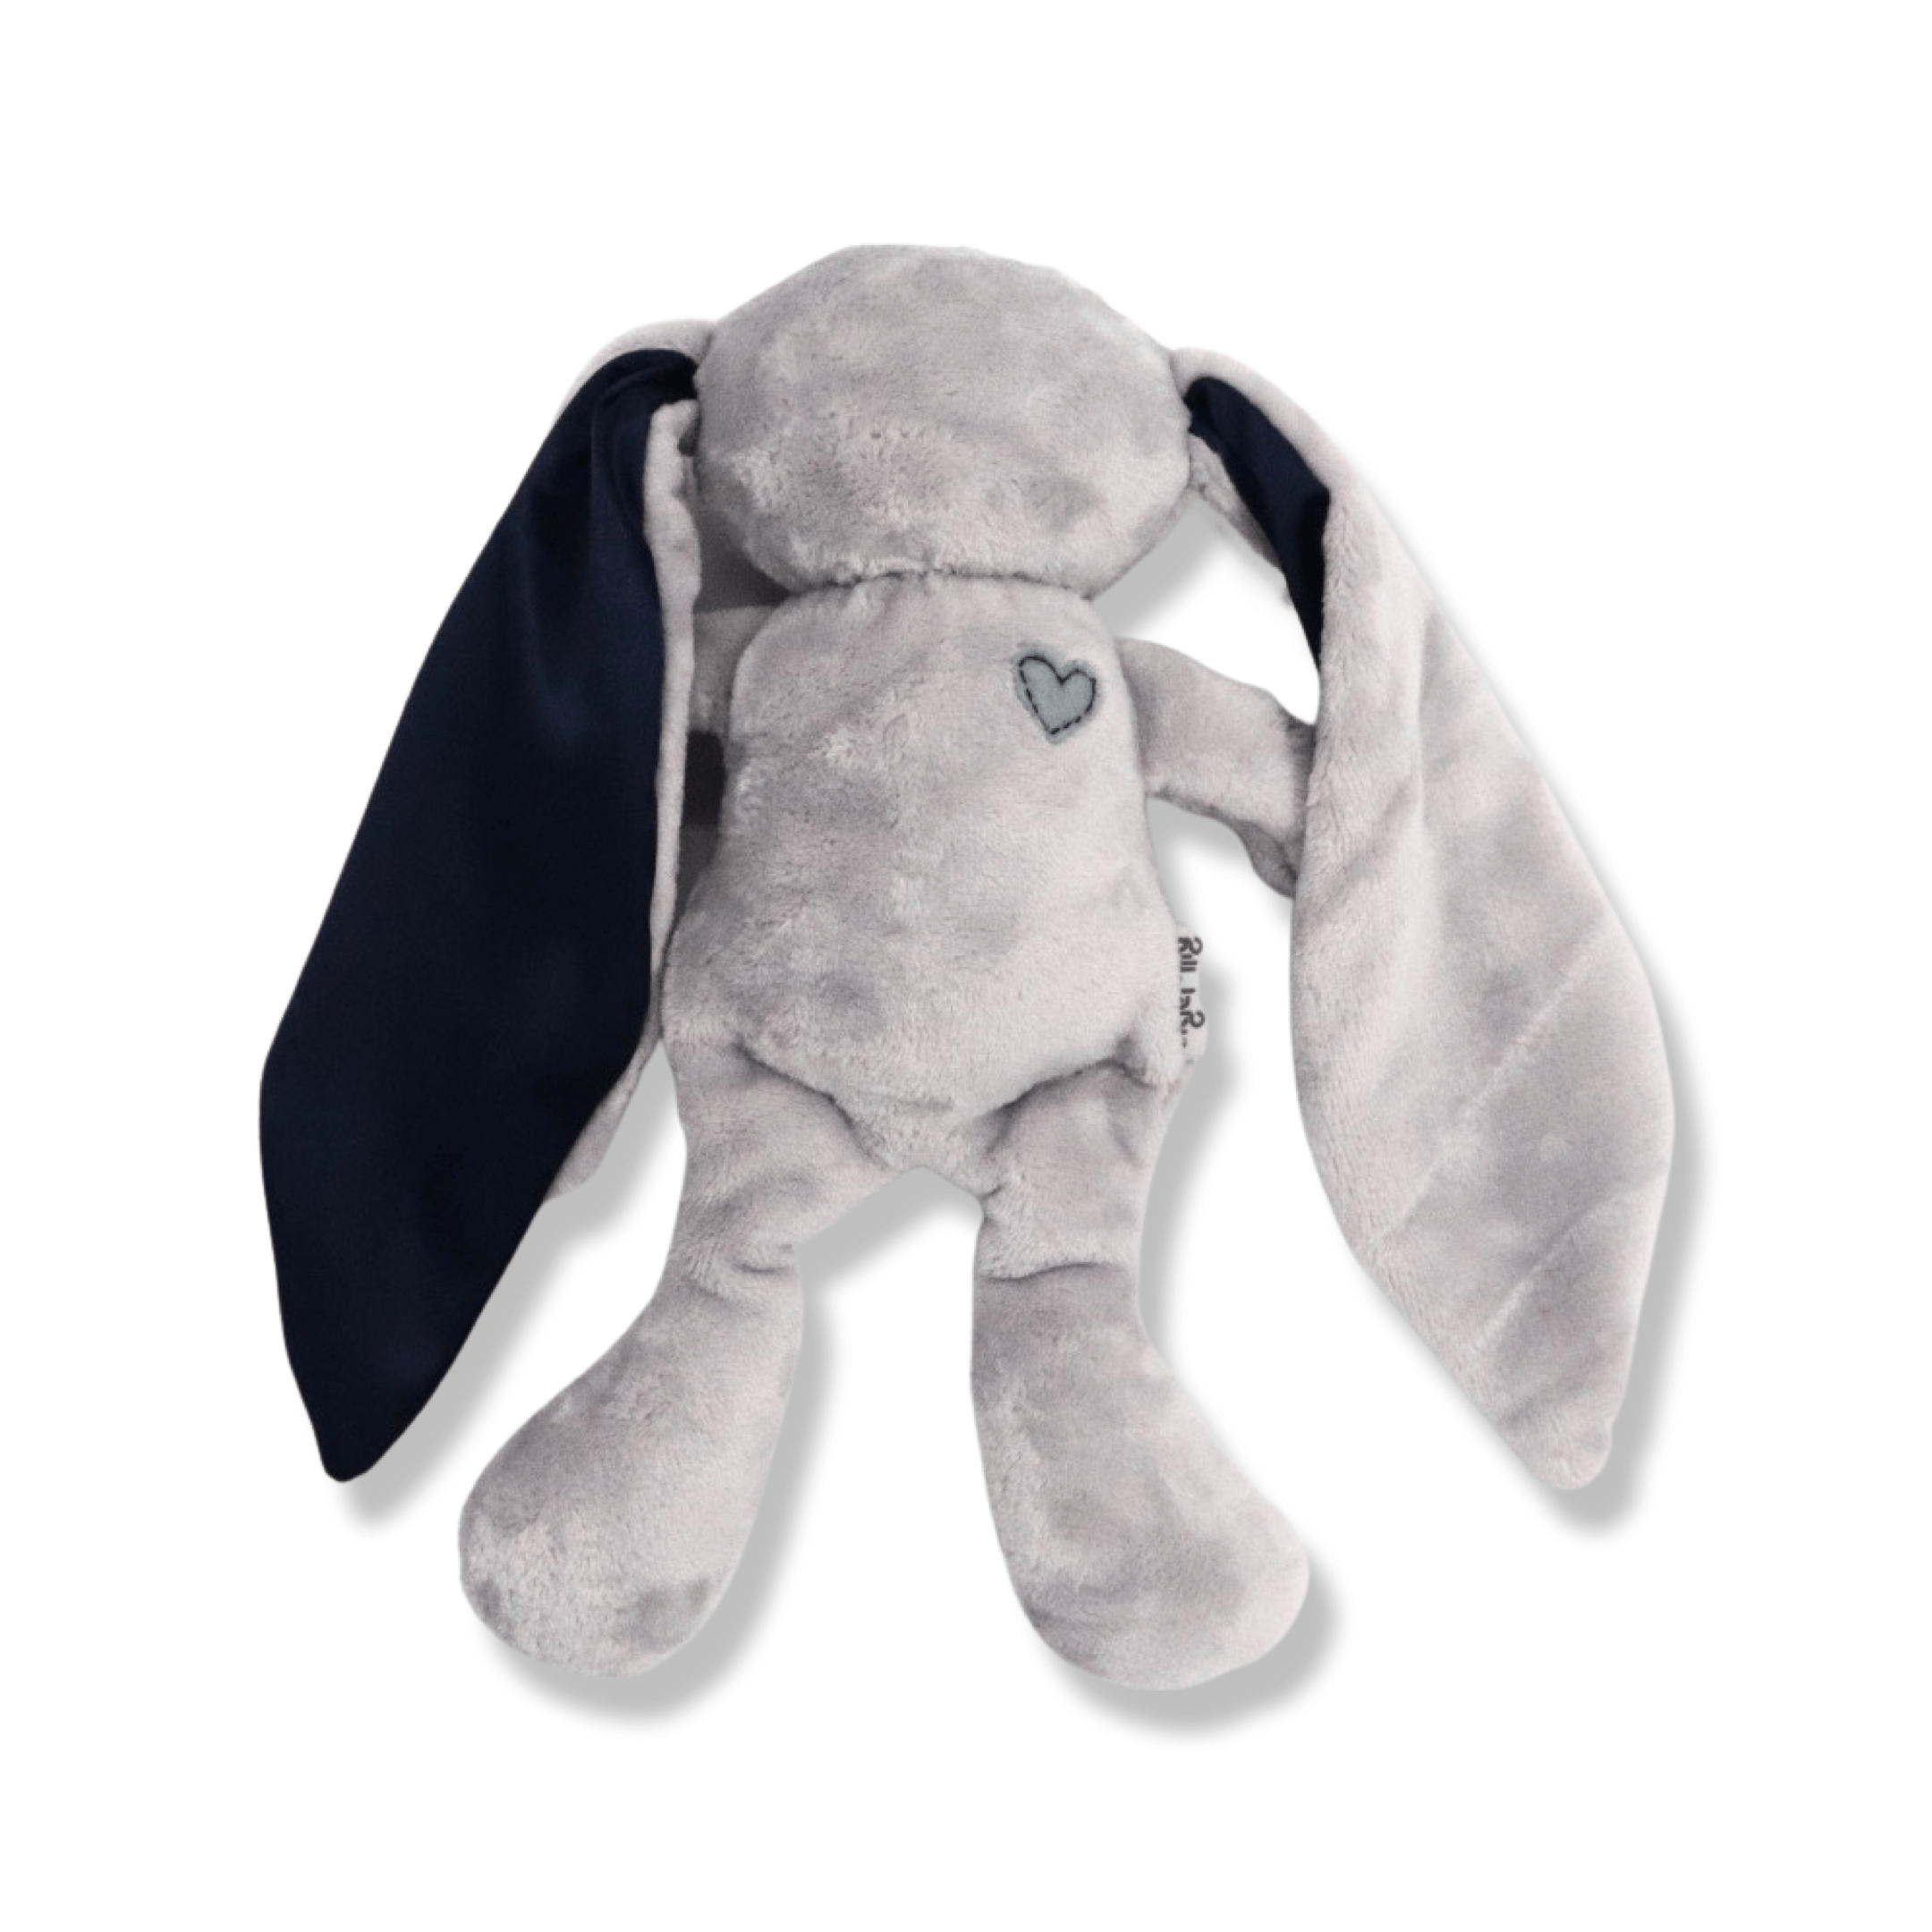 Cuddle Bunnys The Tiger Lily Cuddle Bunny is a sleep essential! This super-soft, super-cuddly bunny with satin ears will prove to be the perfect self-soothing sleep-companion. Wash Care:Machine wash on a gentle, warm settingDimensions:Head-to-toe length approximately 300mmDisclaimer:All products are handcrafted (with love!) and as a result there may be slight variations in size Cuddle Bunnys The Tiger Lily Cuddle Bunny is a sleep essential! This super-soft, super-cuddly bunny with satin ears will prove to b